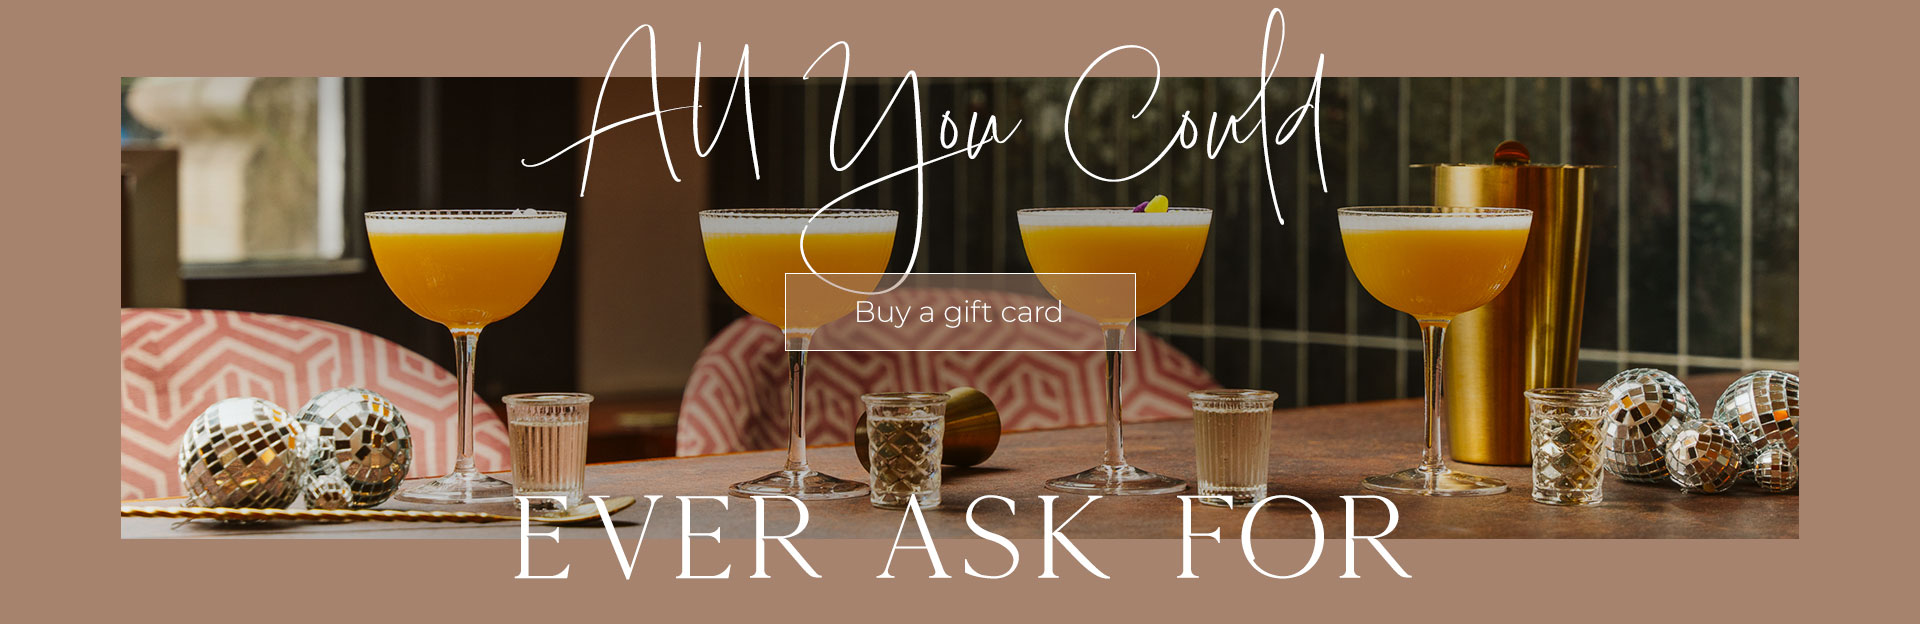 All Bar One Gift Cards at All Bar One Southampton